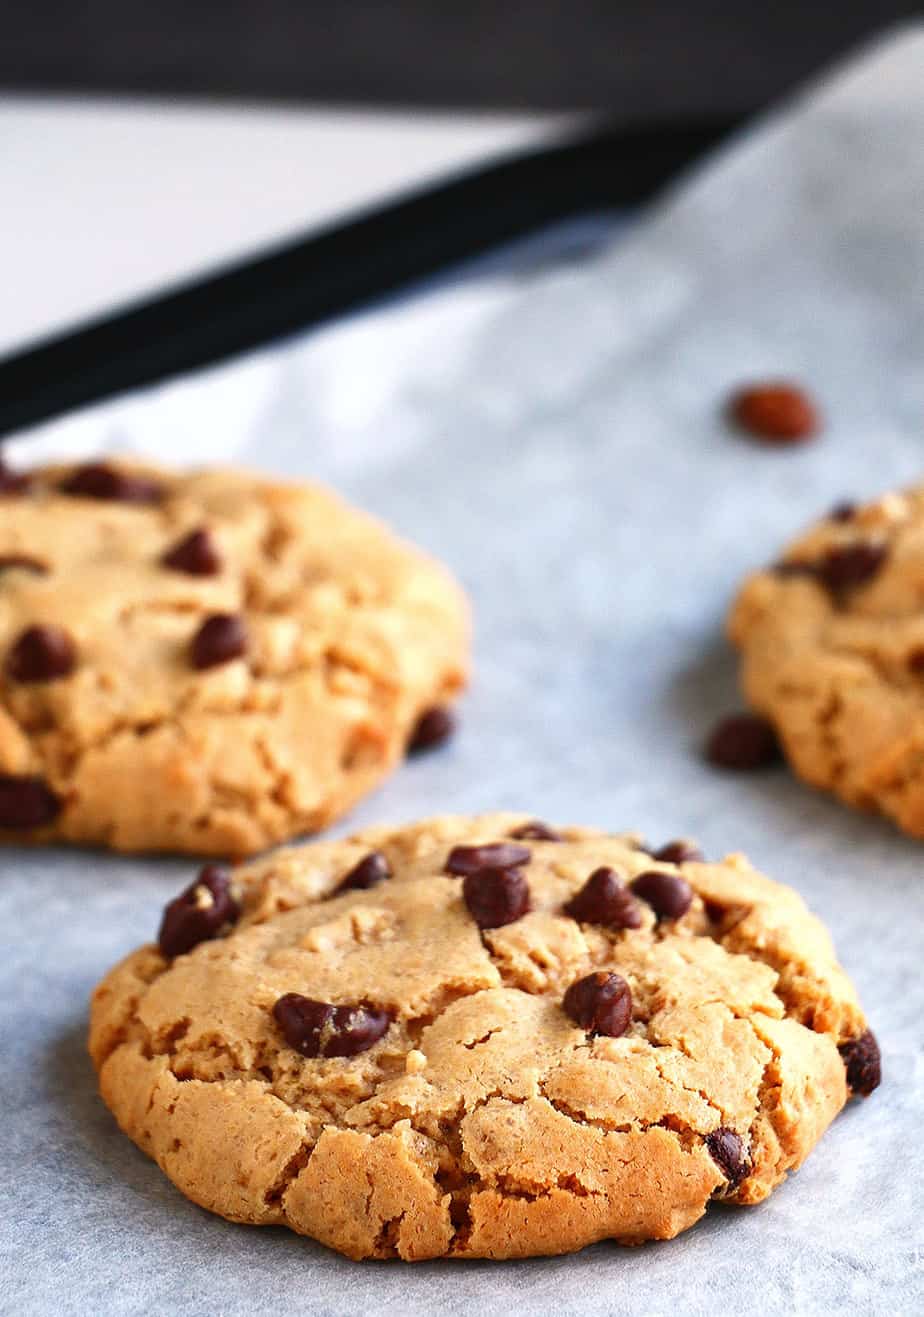 This 10 ingredient easy gluten-free oatmeal peanut butter oatmeal cookies is packed with protein, has a vegan option and are thick and chewy.  